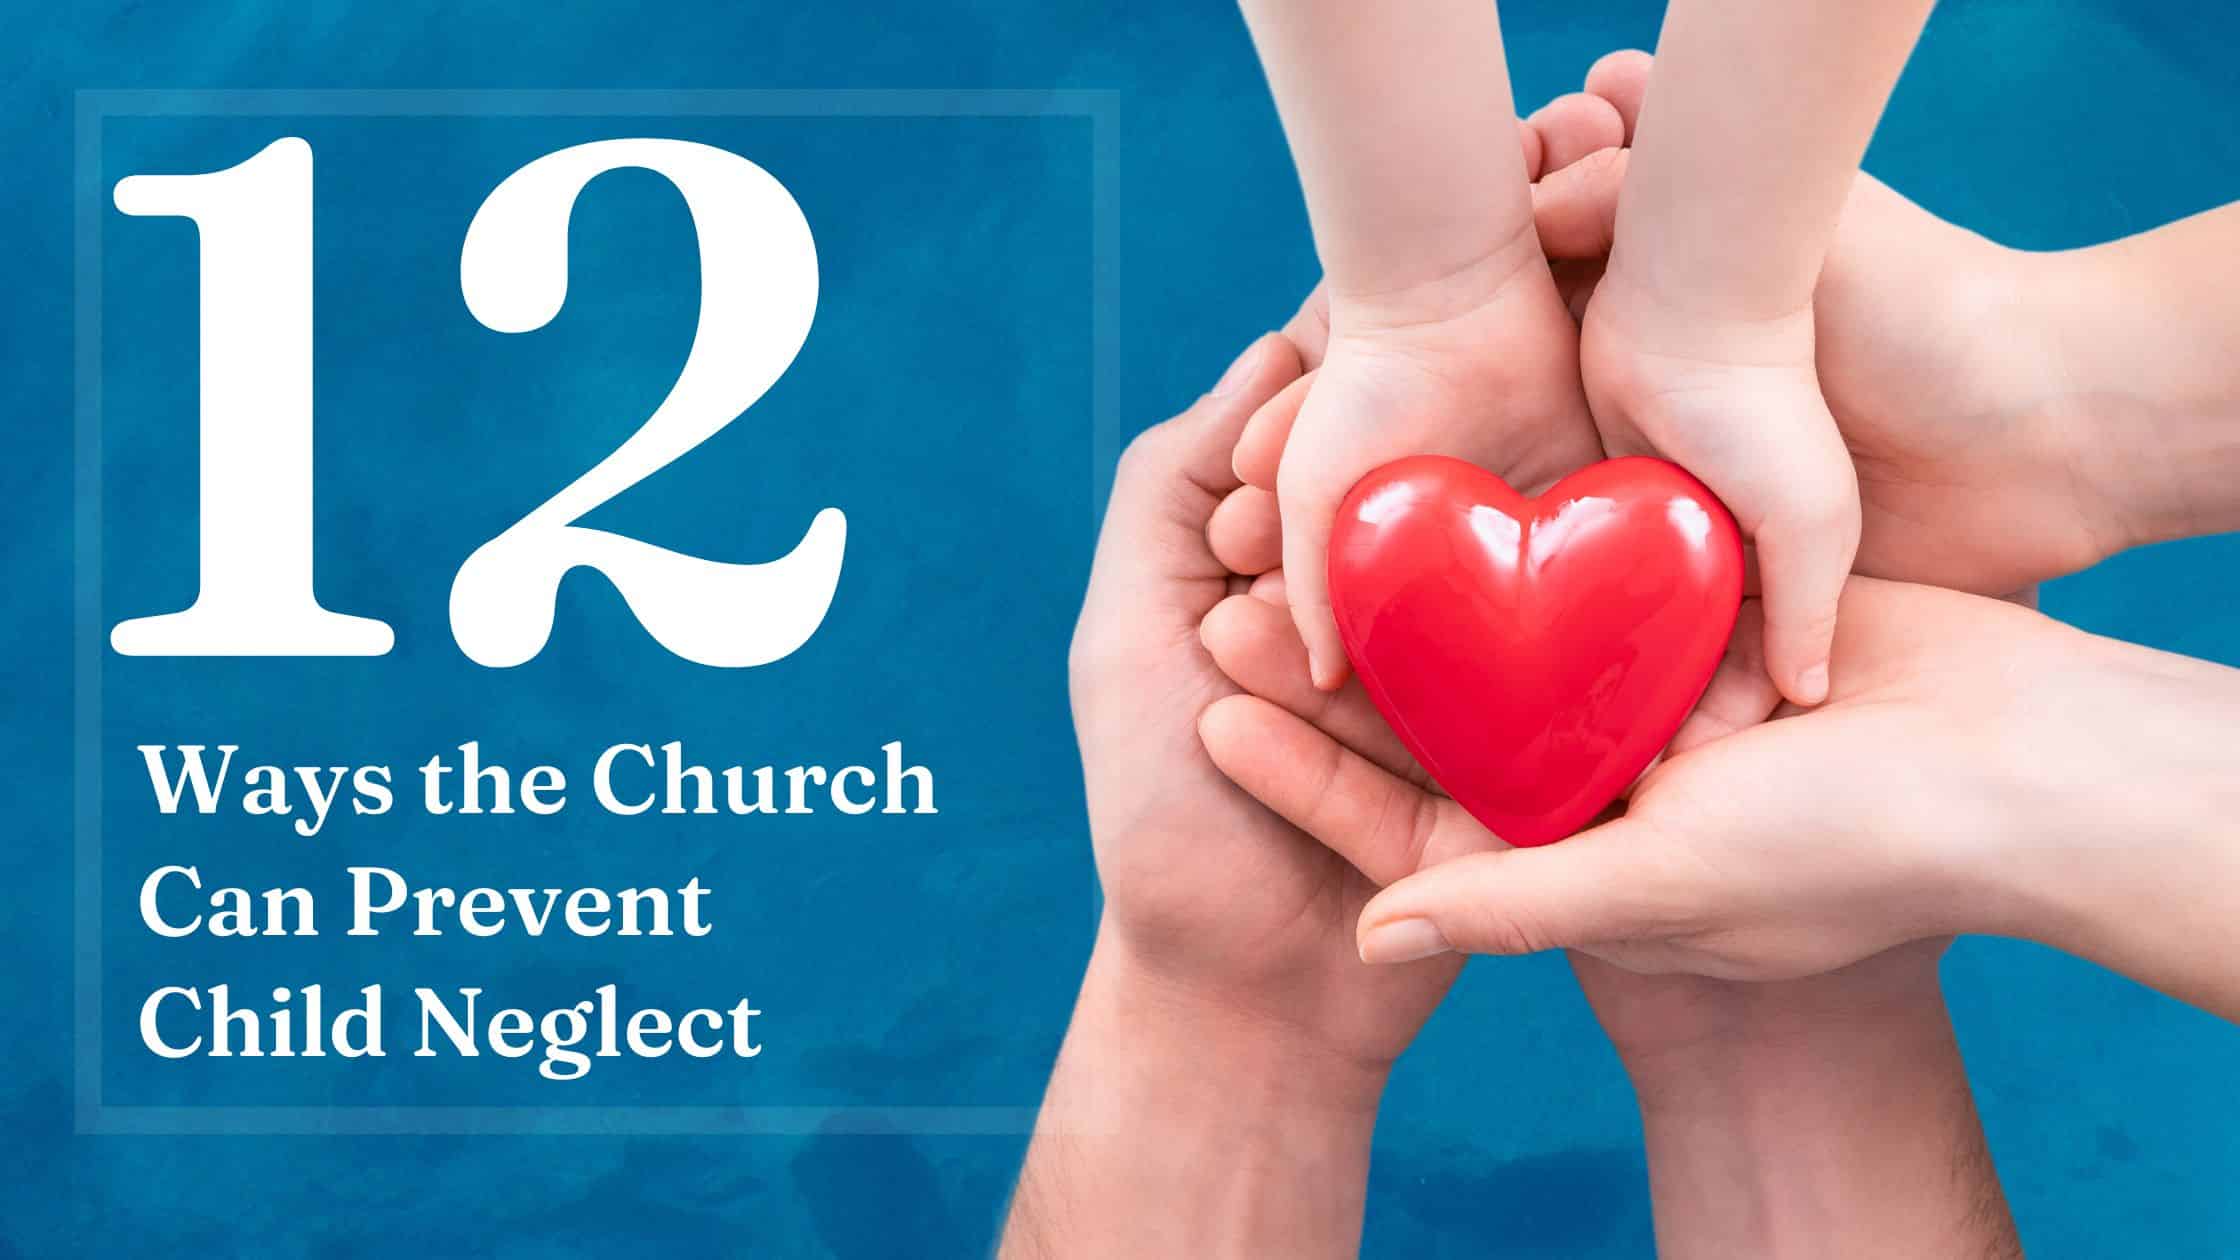 12 ways the church can prevent child neglect